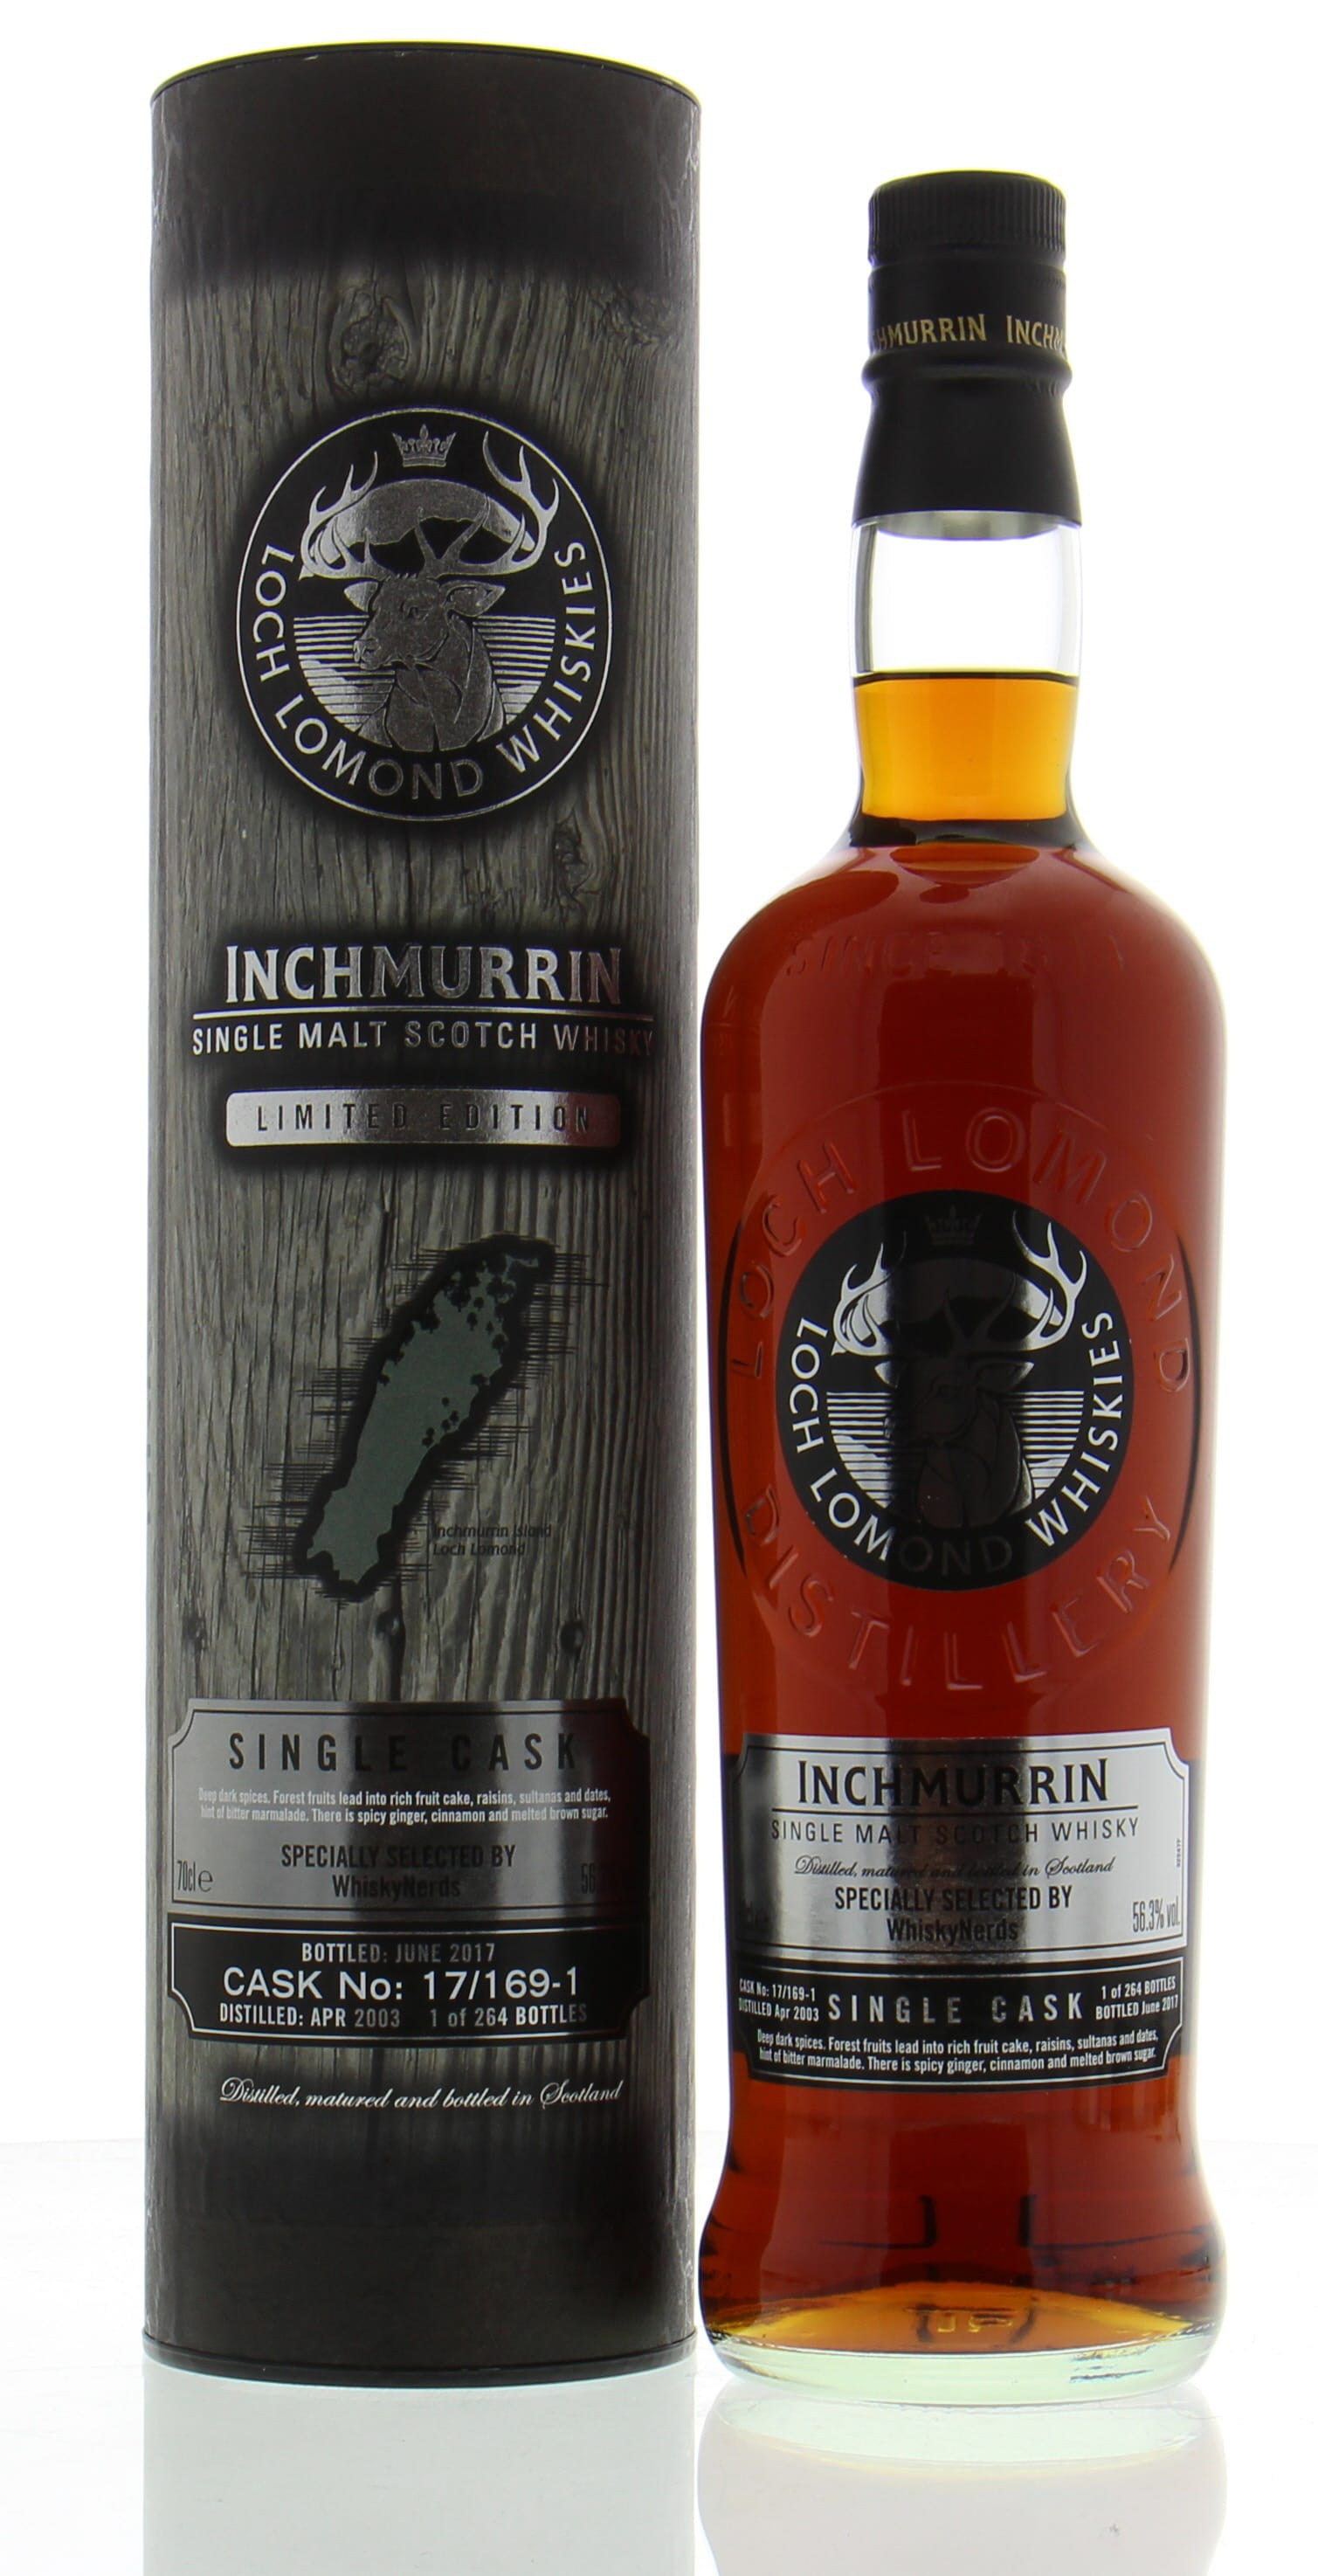 Inchmurrin - 14 Years Old Law For WhiskyNerds Cask:17/169-1 56.3% 2003 Perfect